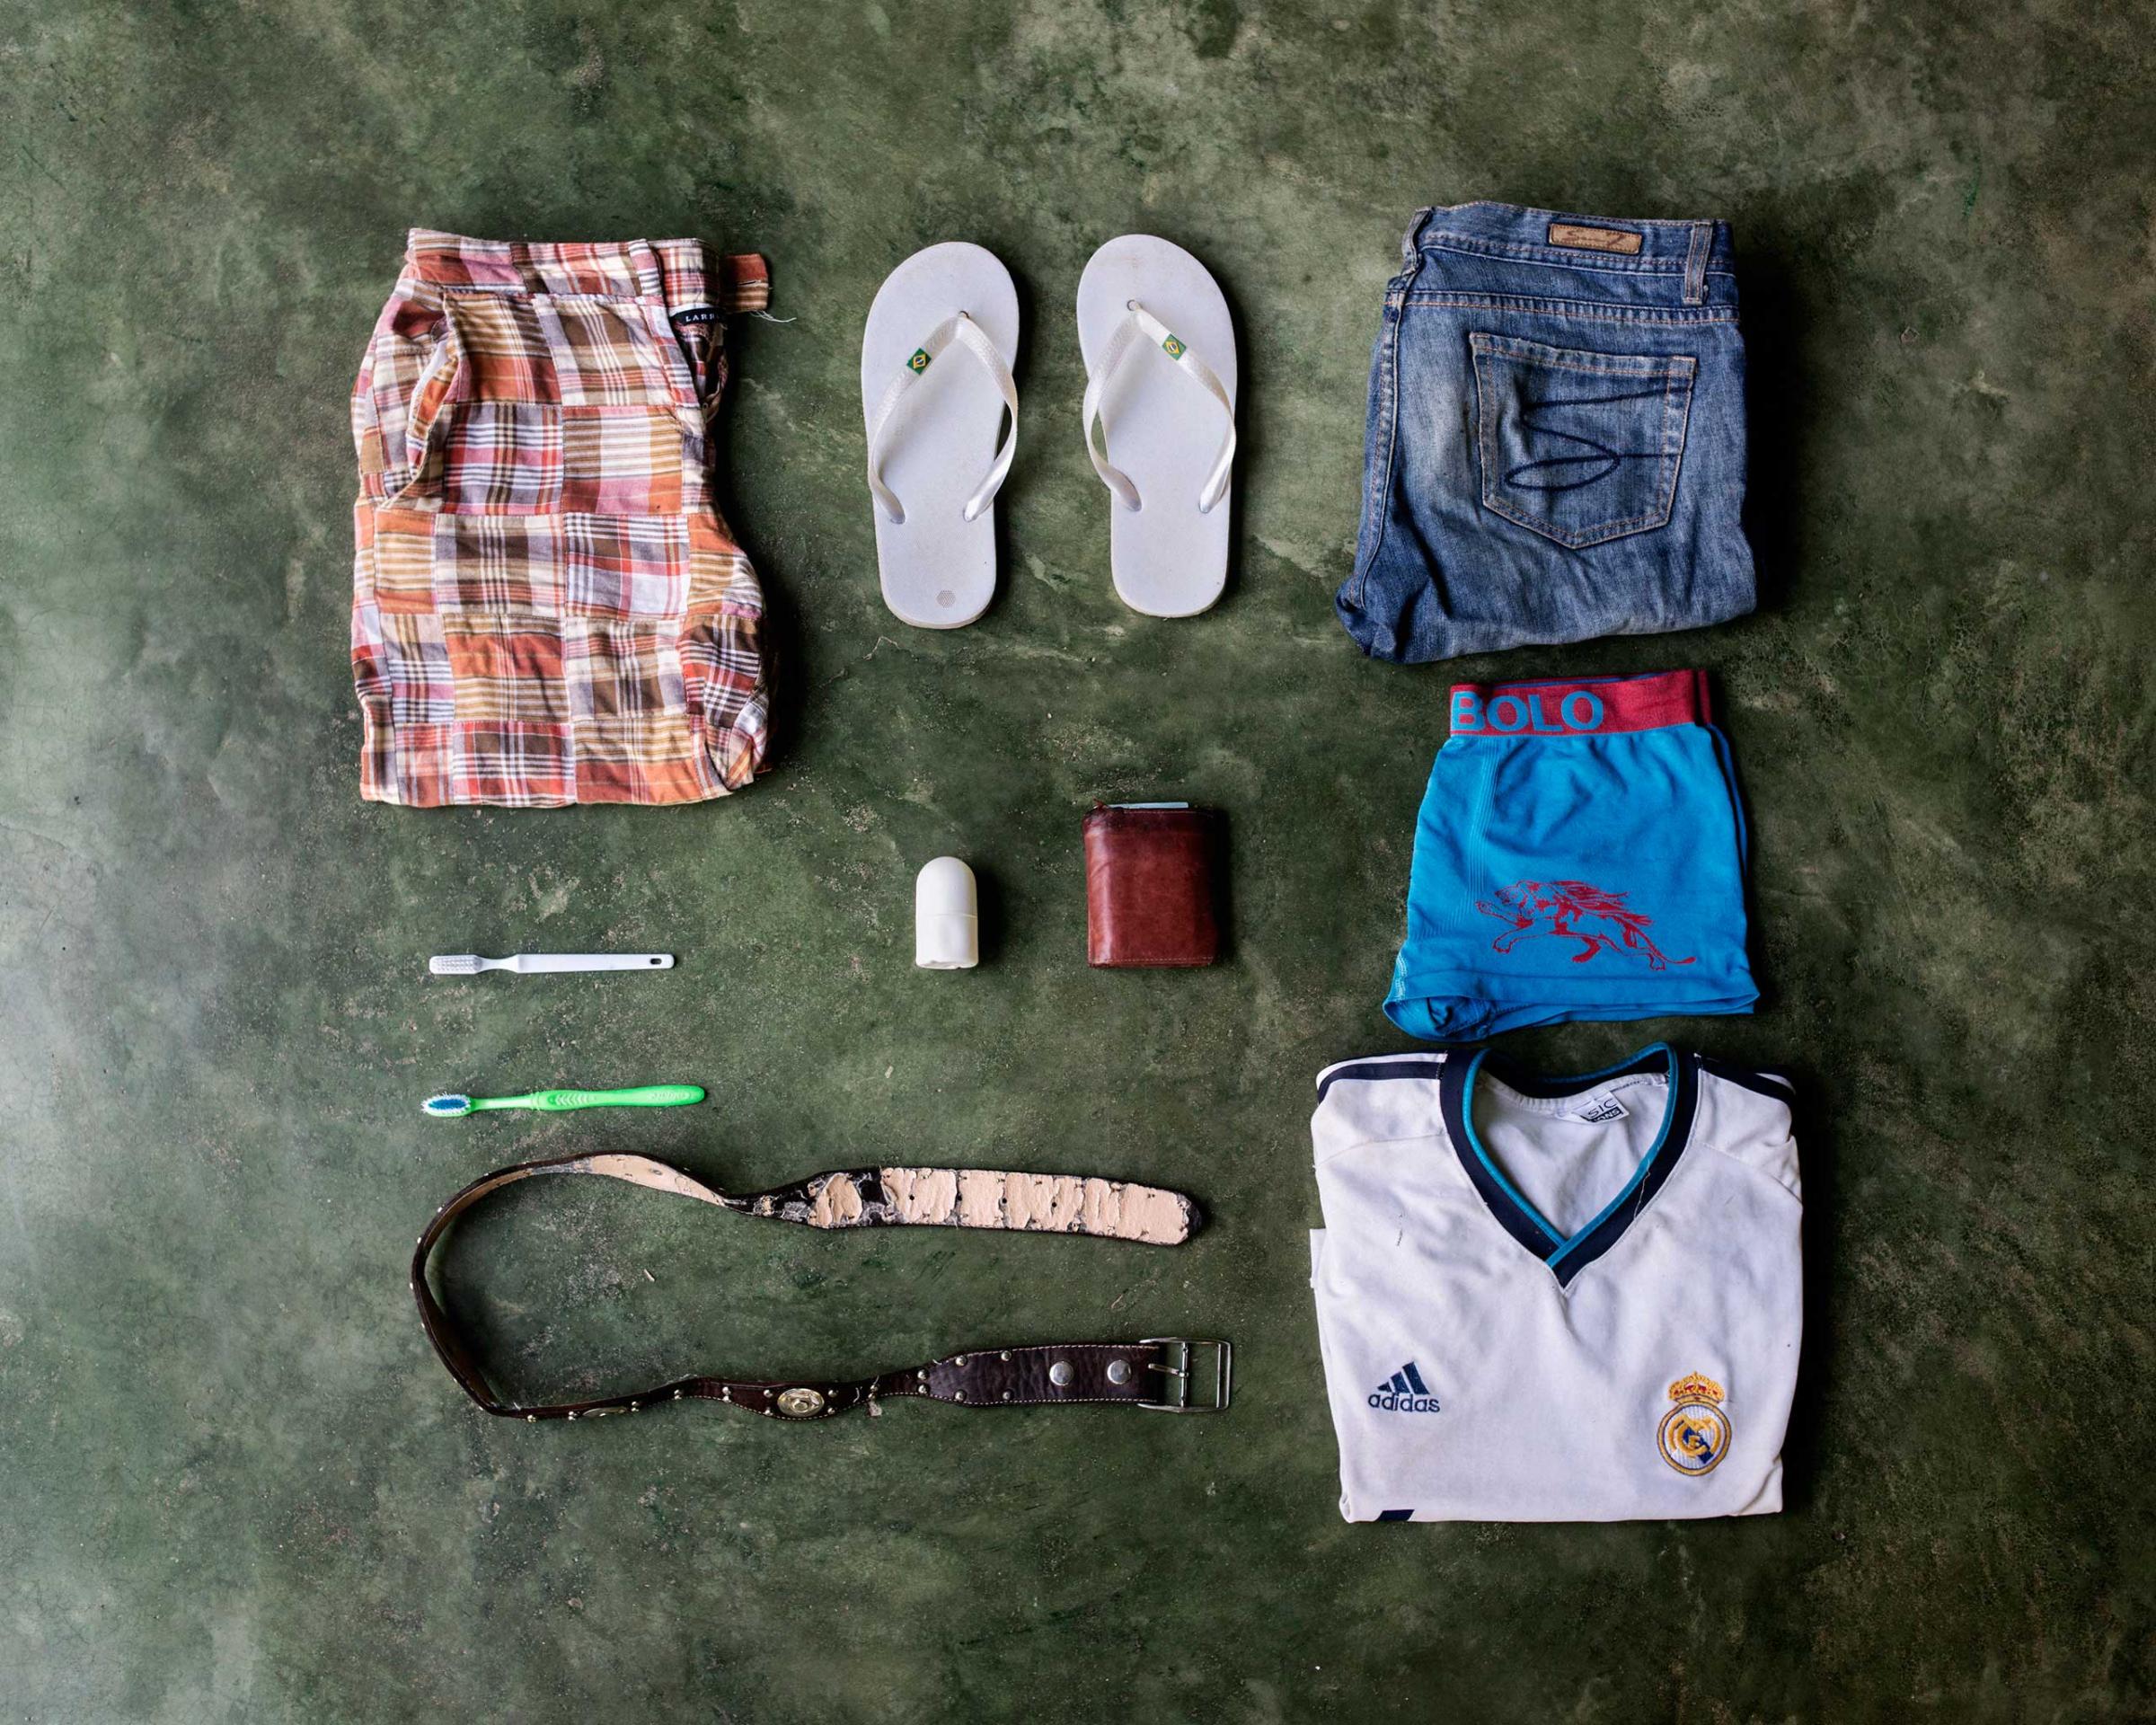 José Alfredo Bin, 27, from Guatemala. Deported from Mexico while he was trying to get to Miami, wants to go to U.S.A. to earn more money. In his bag has a pair of shorts, flip-flops, a pair of pants, two toothbrushes, deodorant, wallet, underwear, belt and a t-shirt of Real Madrid.